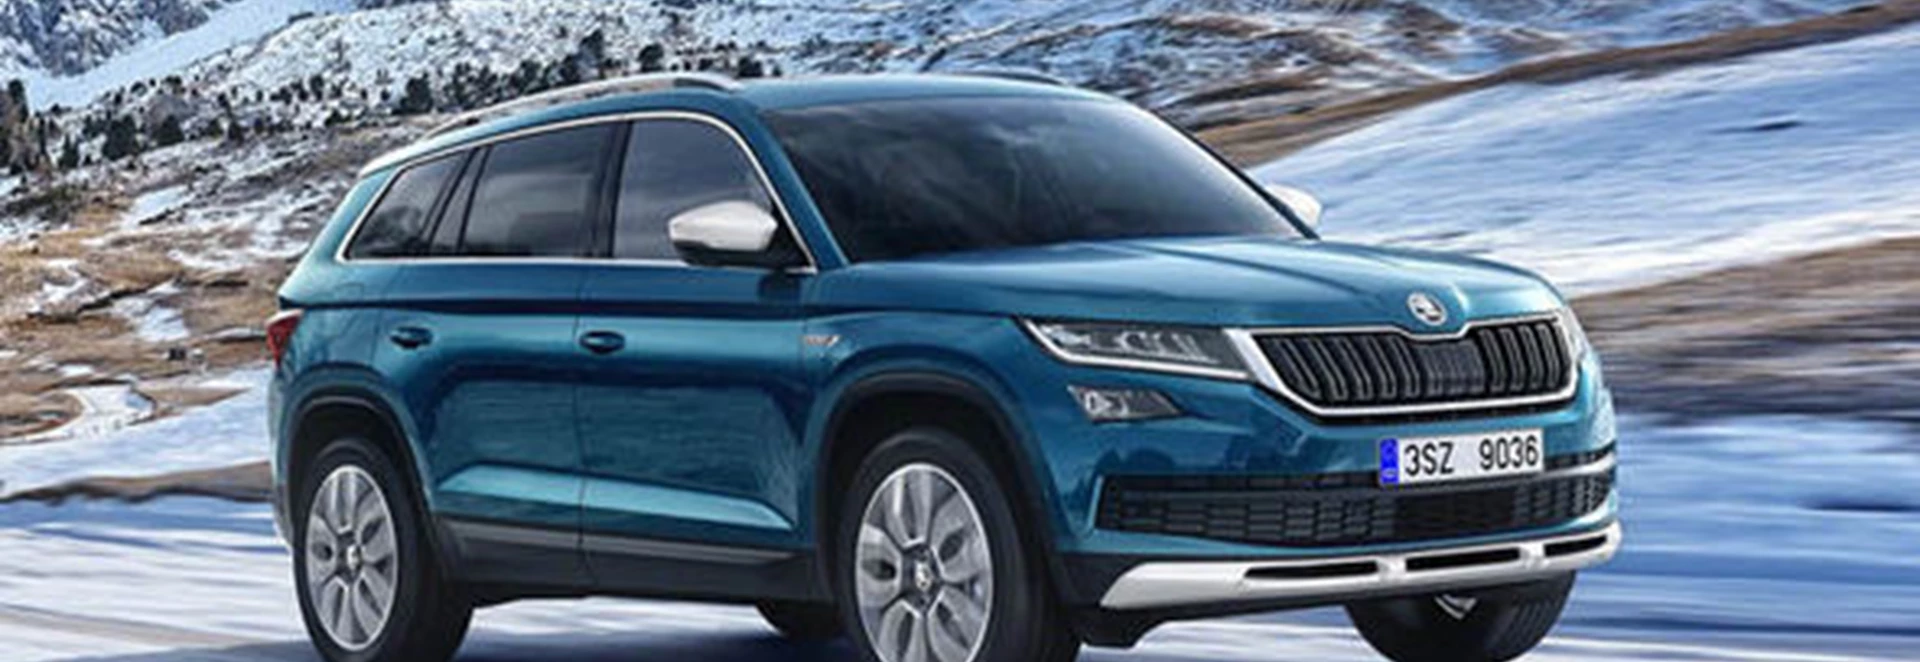 The new Skoda Kodiaq Scout SUV goes the full off-roader